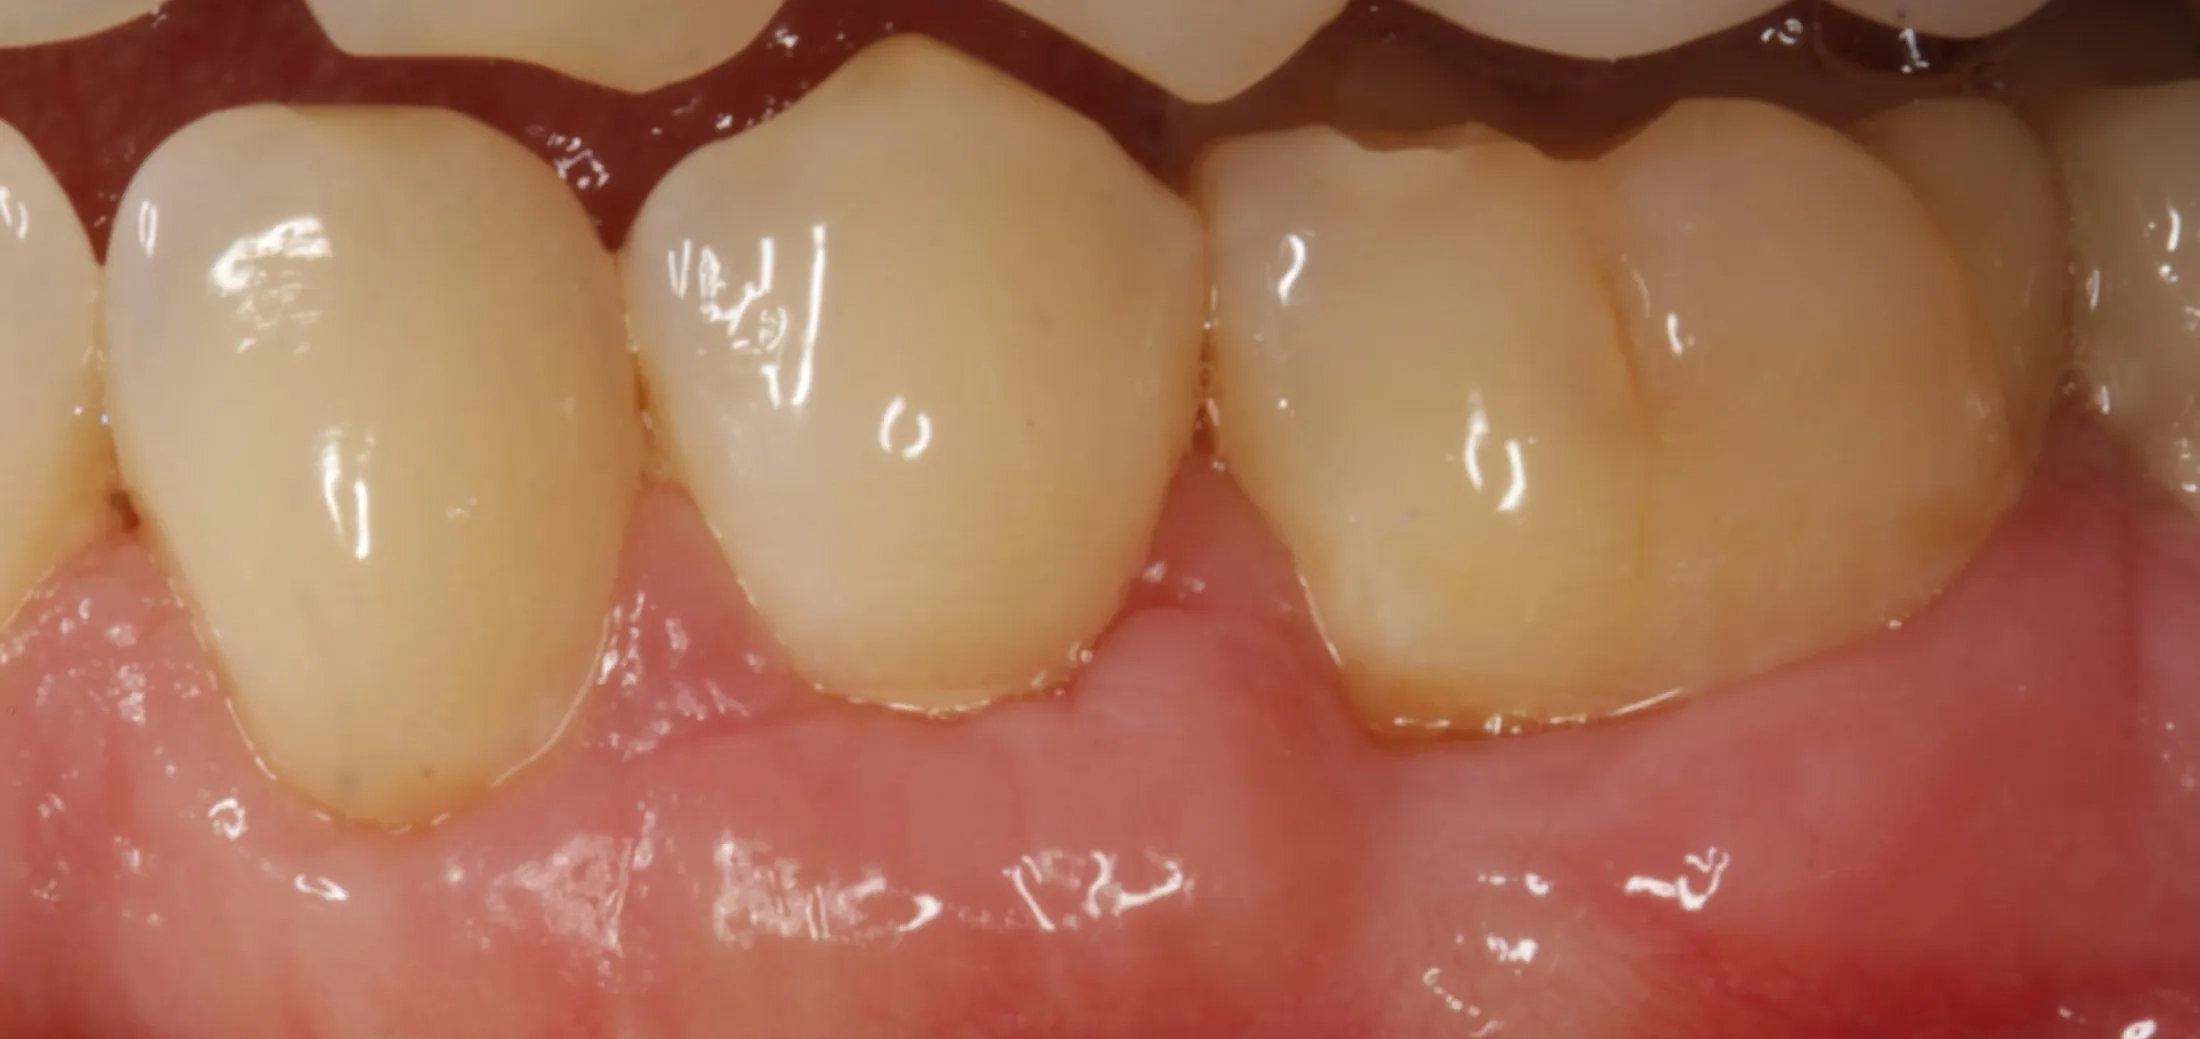 Final appearance of gums following successful periodontal grafting.